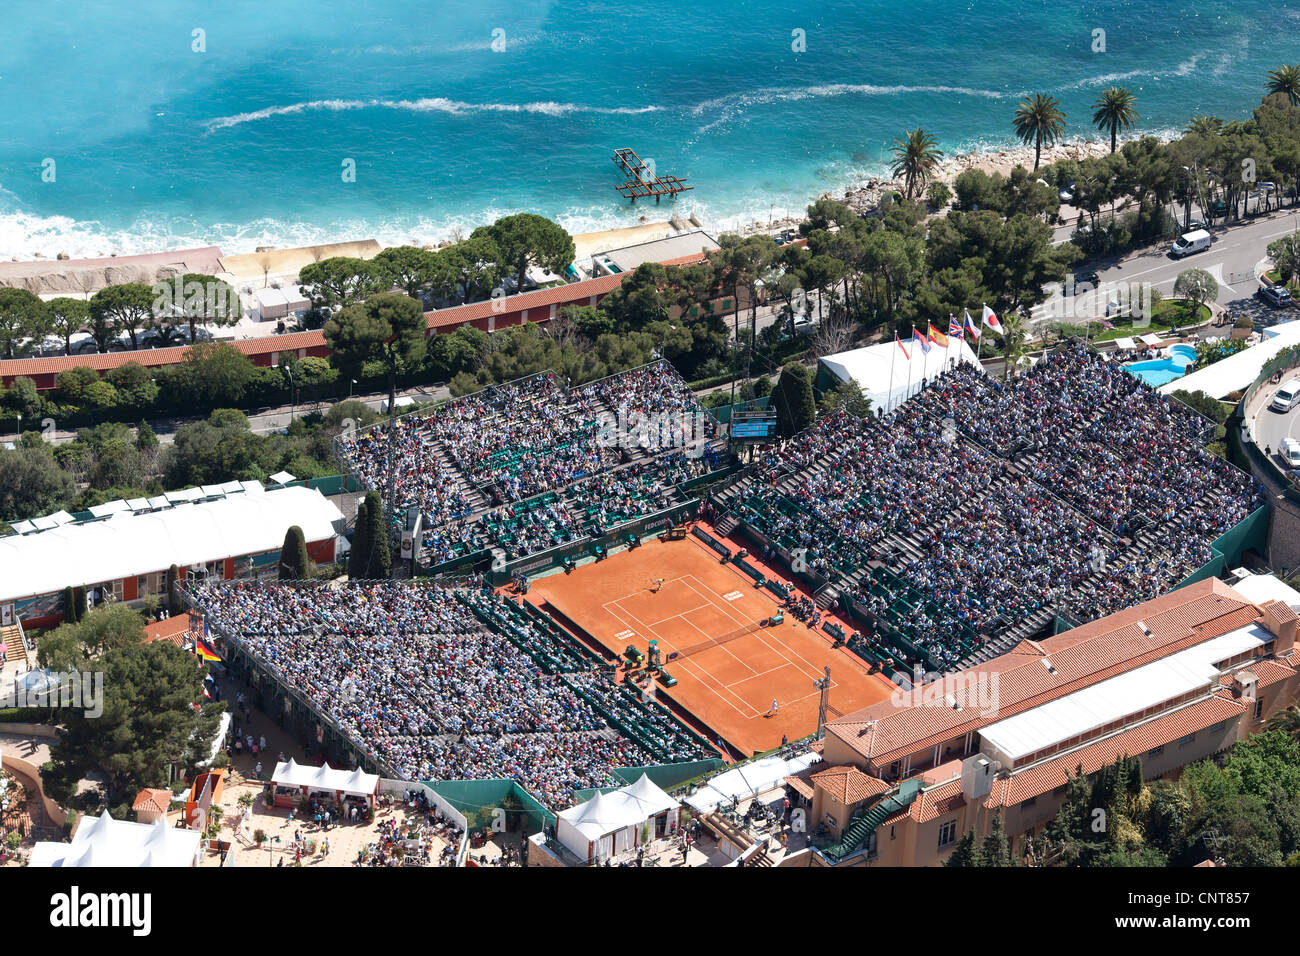 Monte-Carlo Rolex Masters in 2012. Quarter-finals: Djokovic VS Haase. This event actually takes place in Roquebrune-Cap-Martin, France. Stock Photo